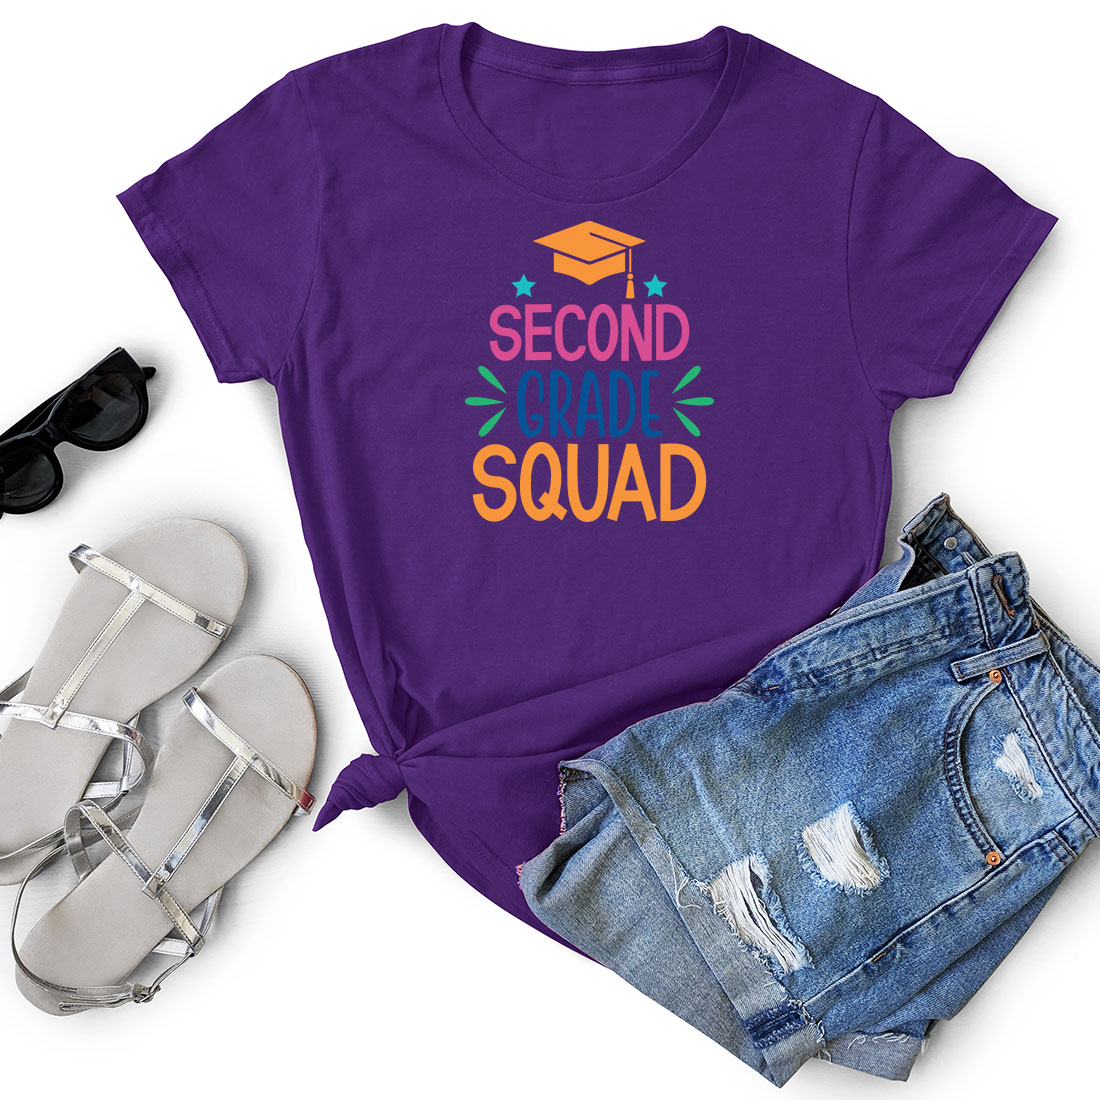 Purple shirt that says second day squad next to a pair of shorts.